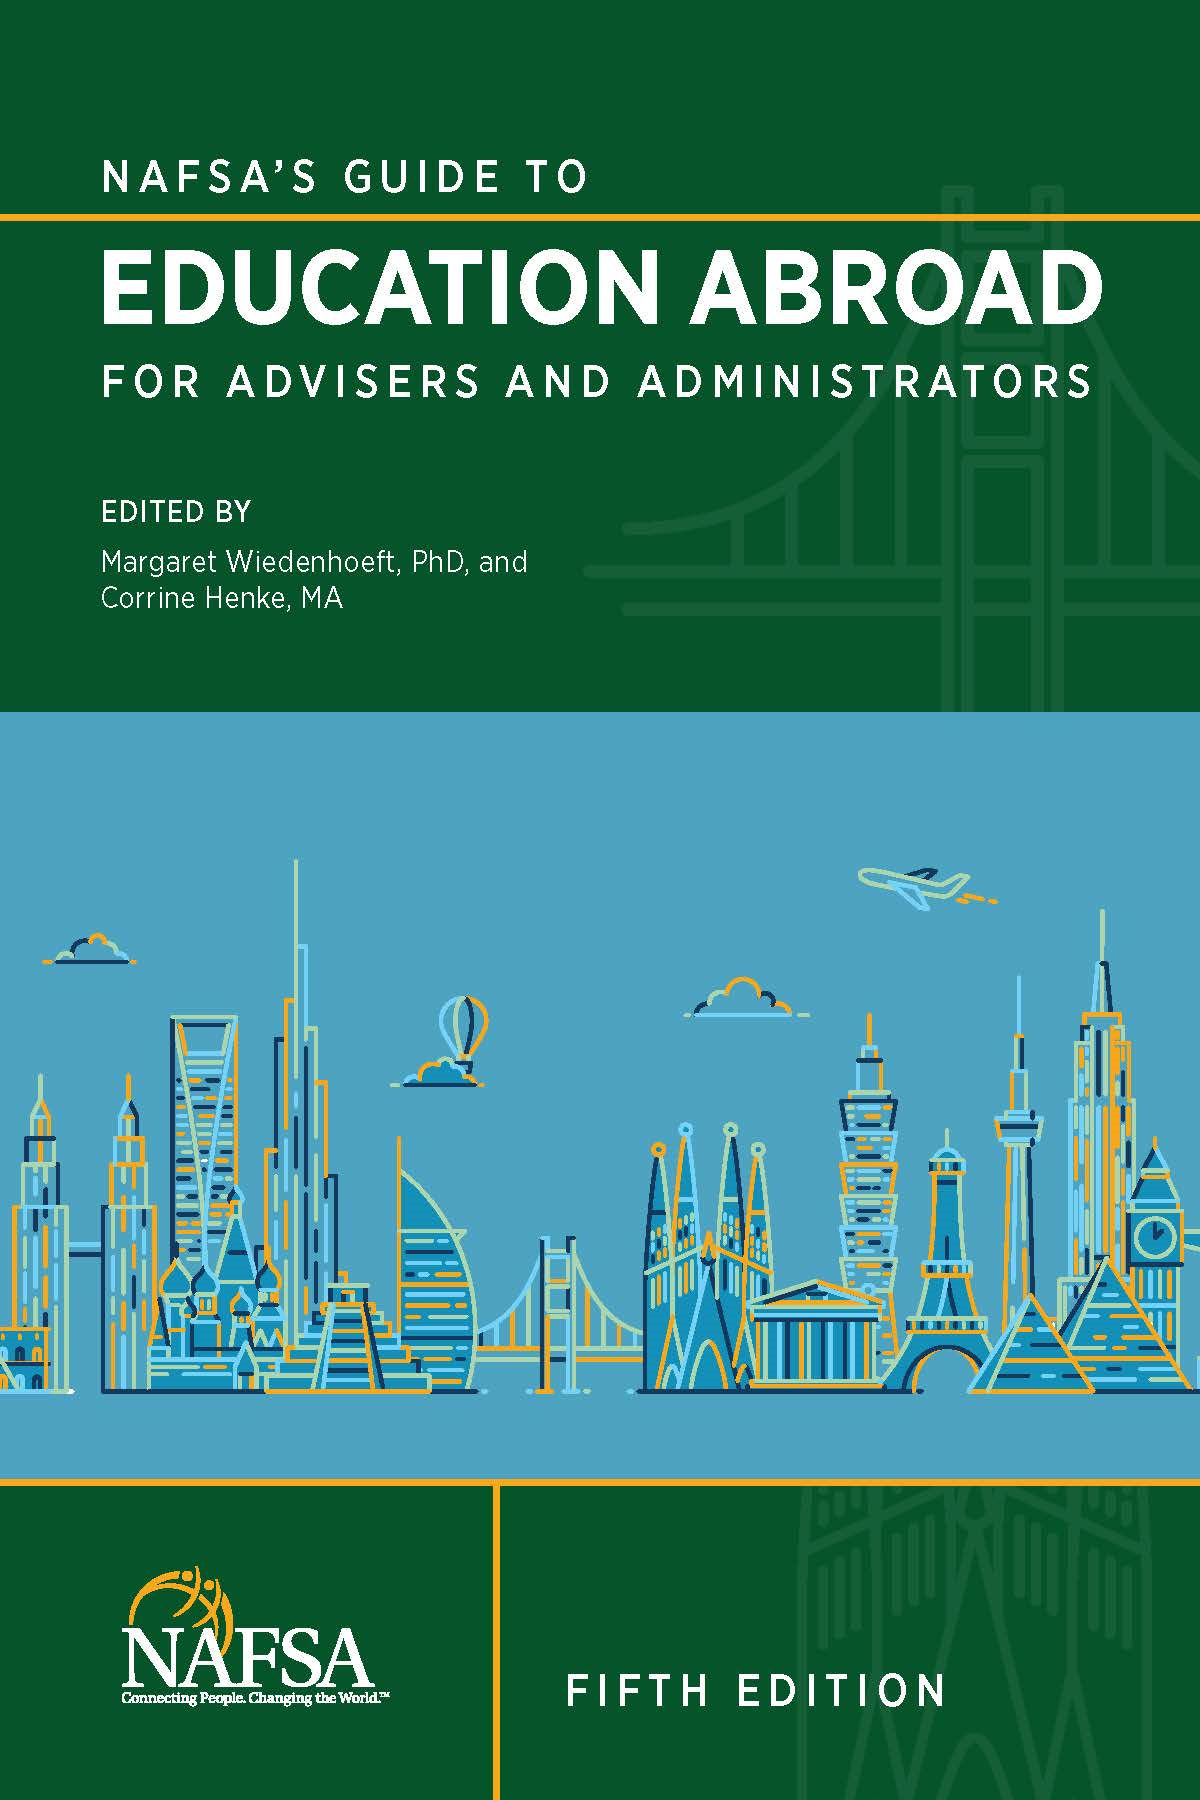 NAFSA's Guide to Education Abroad, Fifth Edition